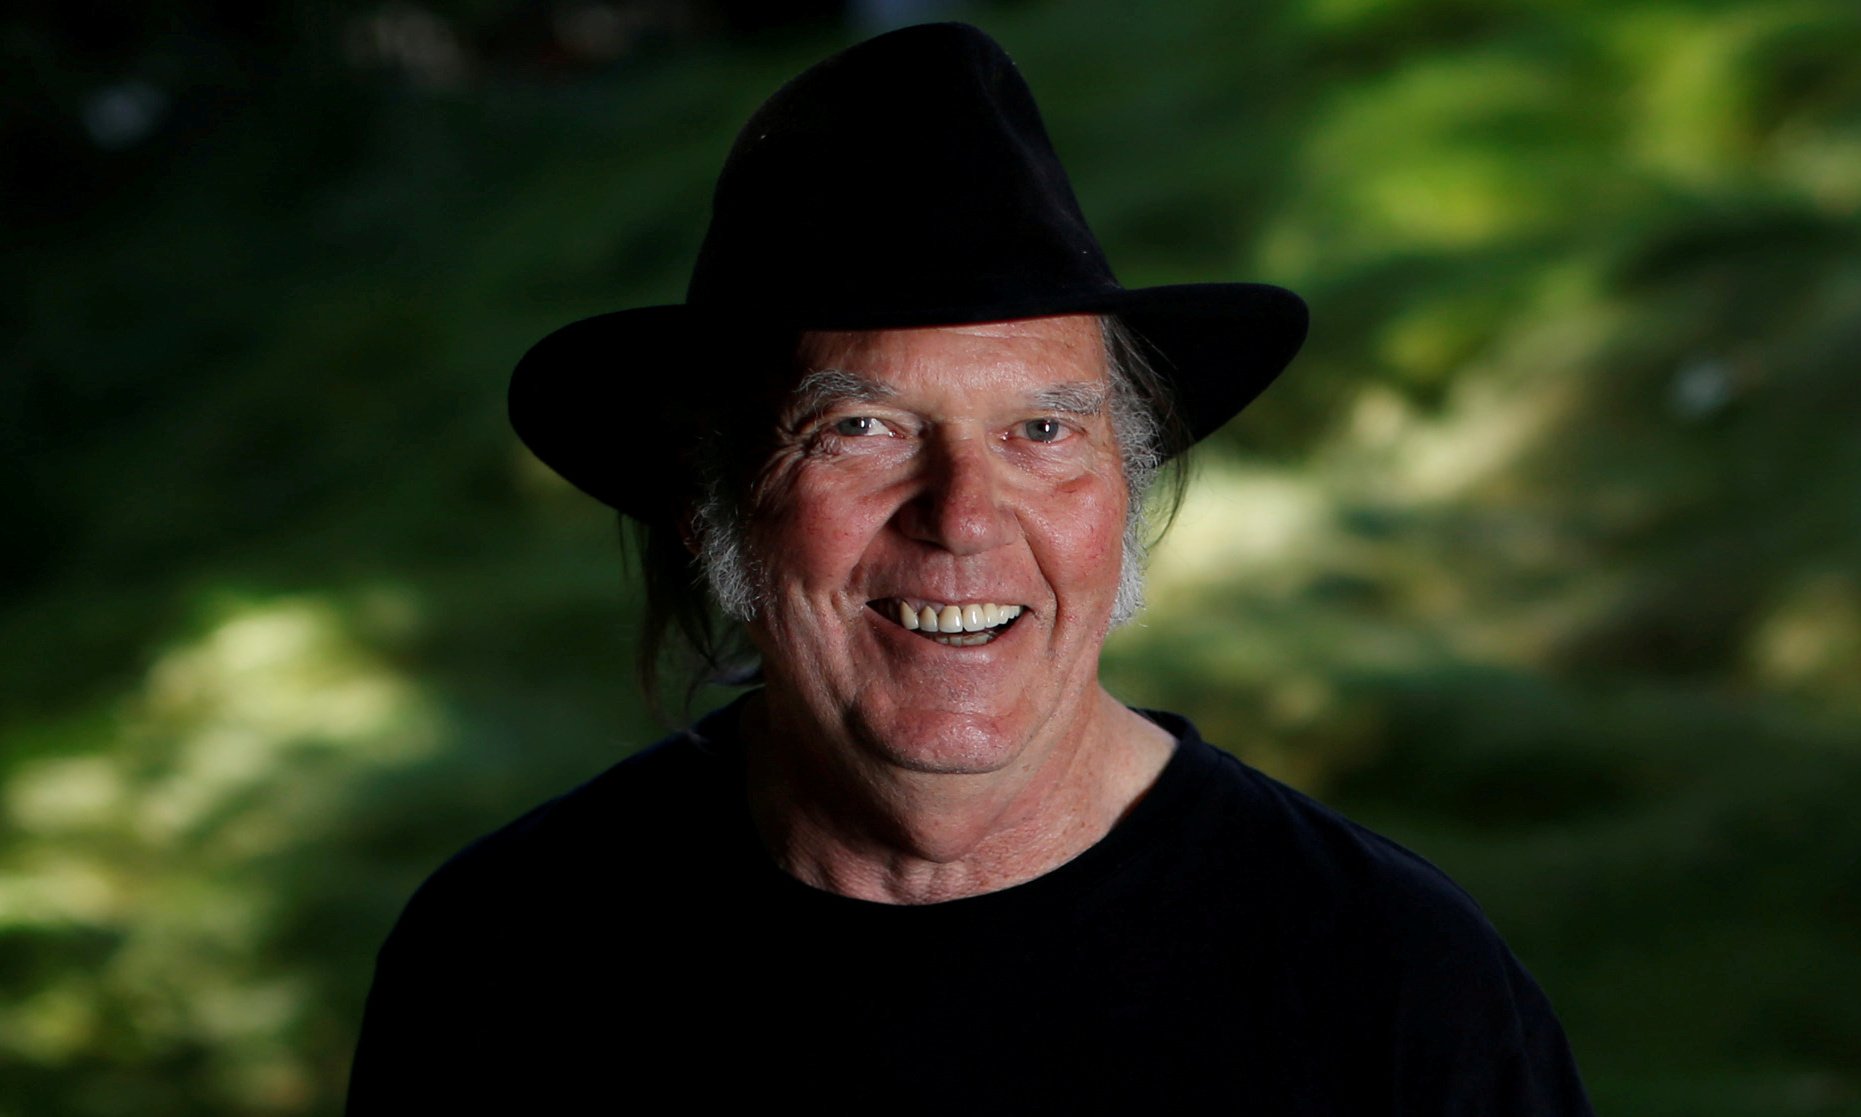 Neil Young’s battle with Spotify is principled – and comfortable